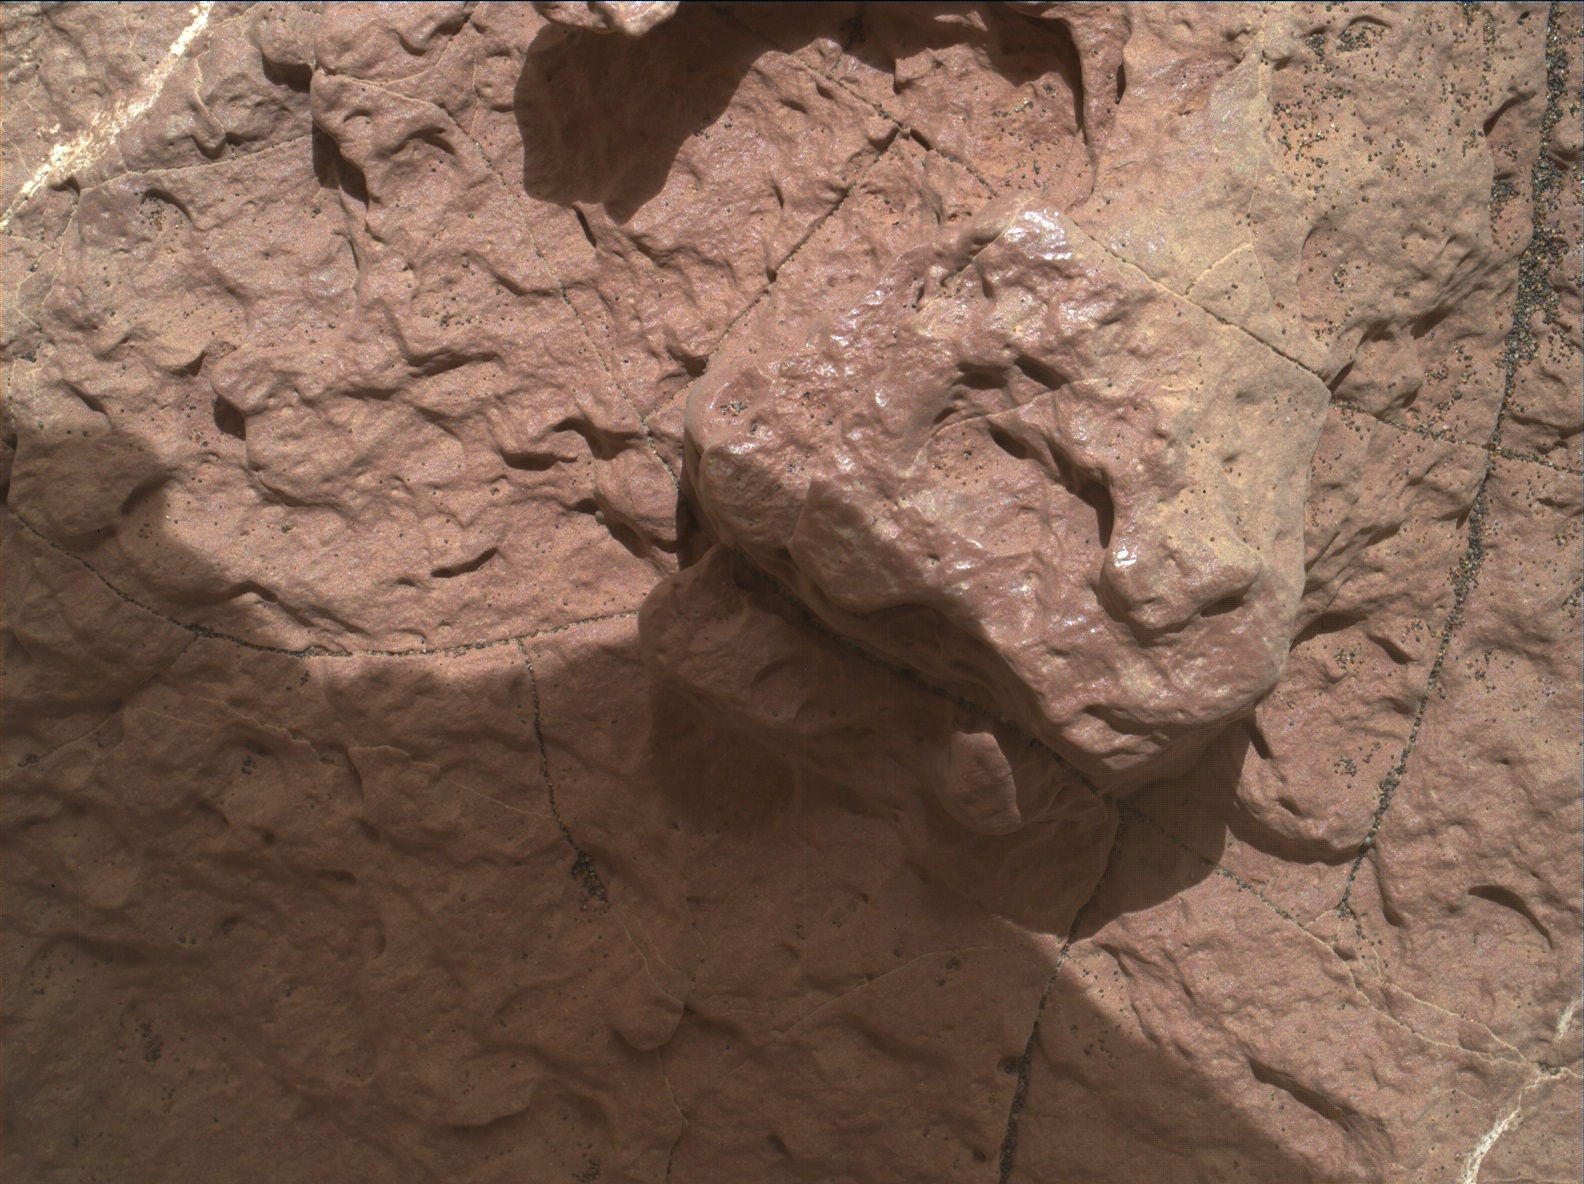 Nasa's Mars rover Curiosity acquired this image using its Mars Hand Lens Imager (MAHLI) on Sol 1575